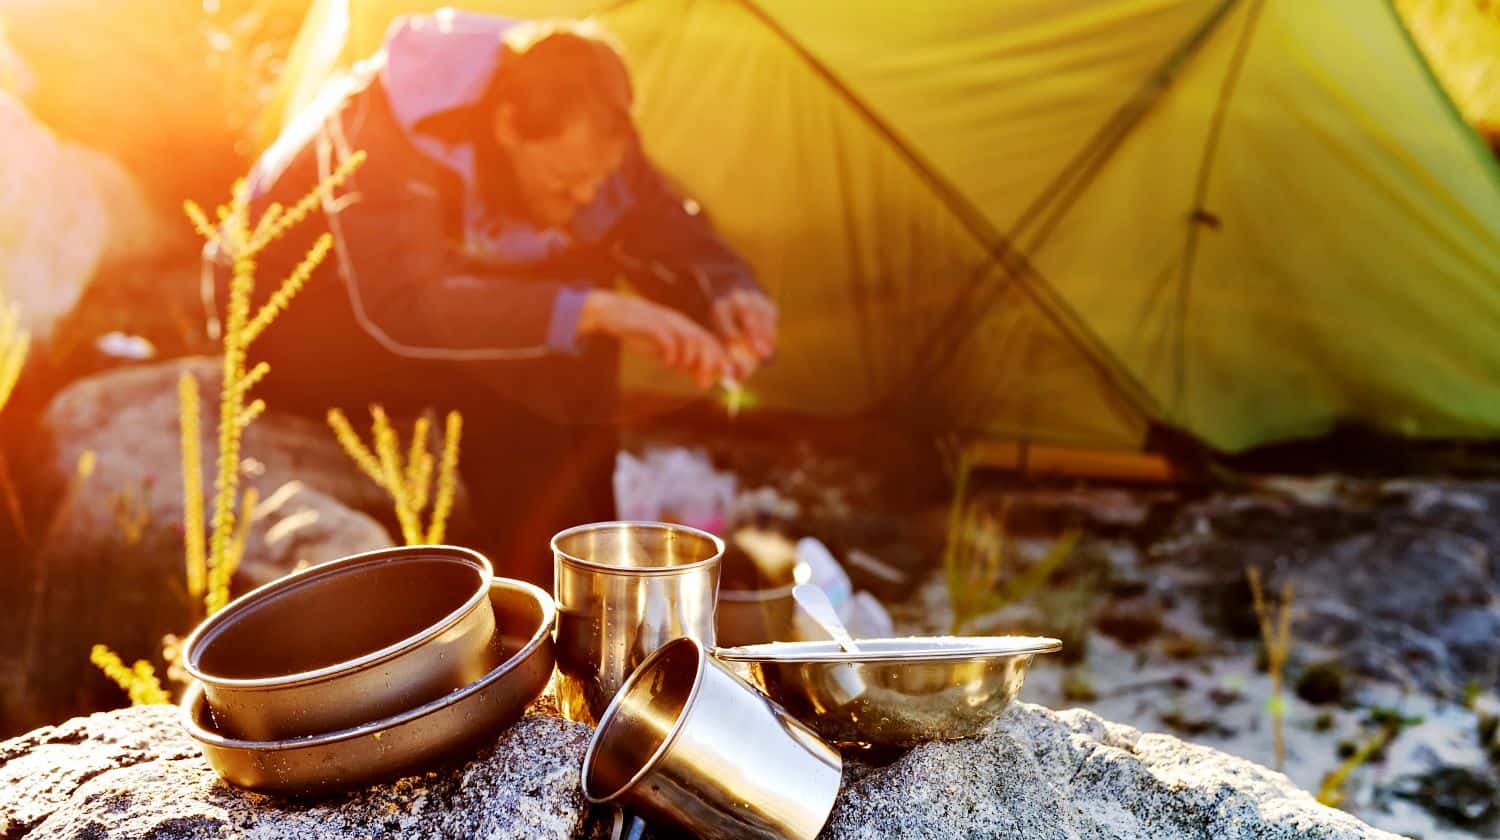 Featured | Adventure camping man cooking alone outdoors with tent, sunrise and lens flare in the mountain morning sunlight | Outdoor Survival Hacks Using Everyday Items